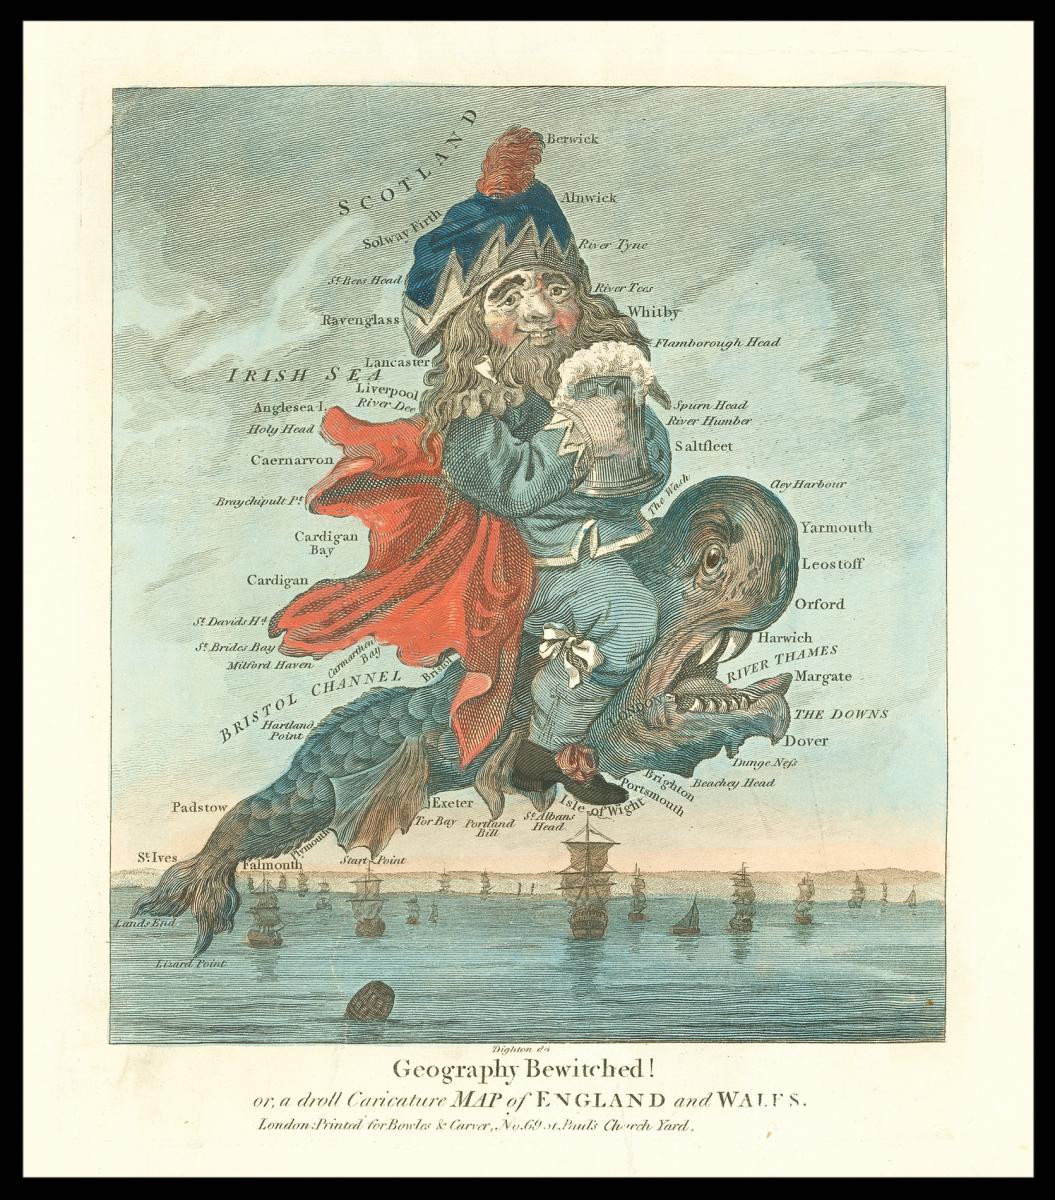 Dighton's caricature map of England and Wales